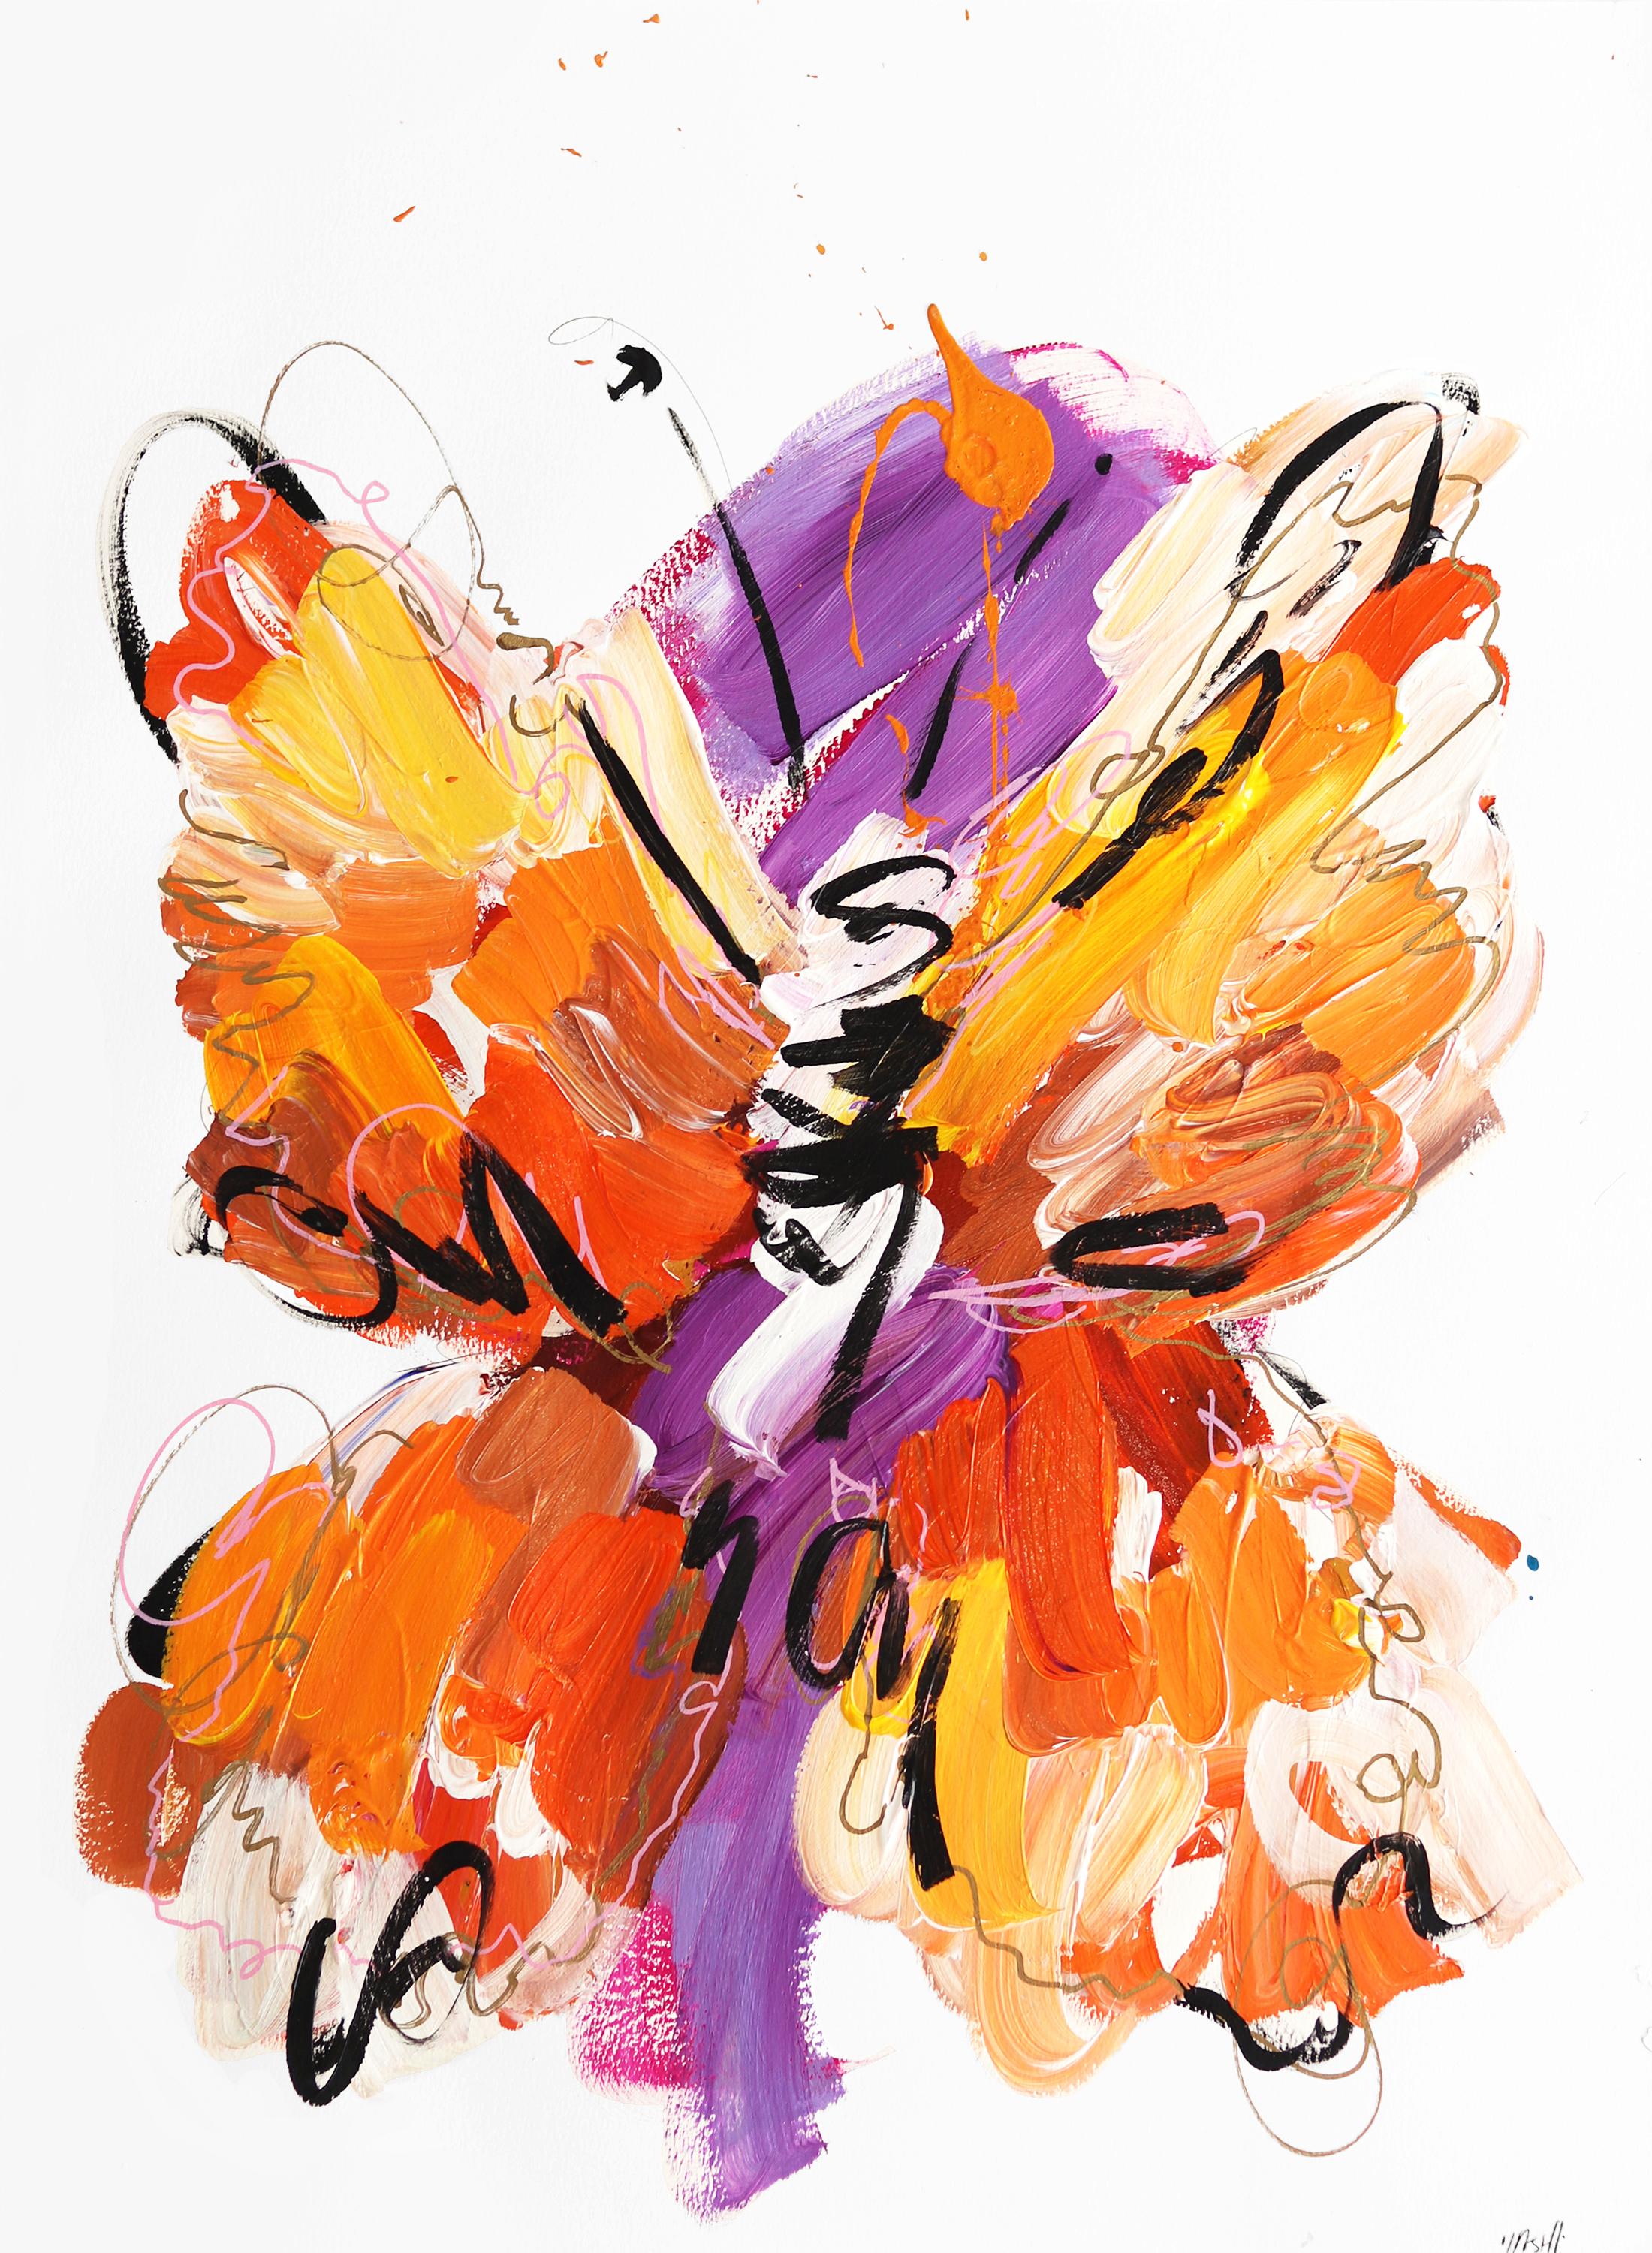 Ash Almonte Figurative Painting - Orange Butterfly Purple Swirl  -  Abstract Textural Painting on Archival Paper